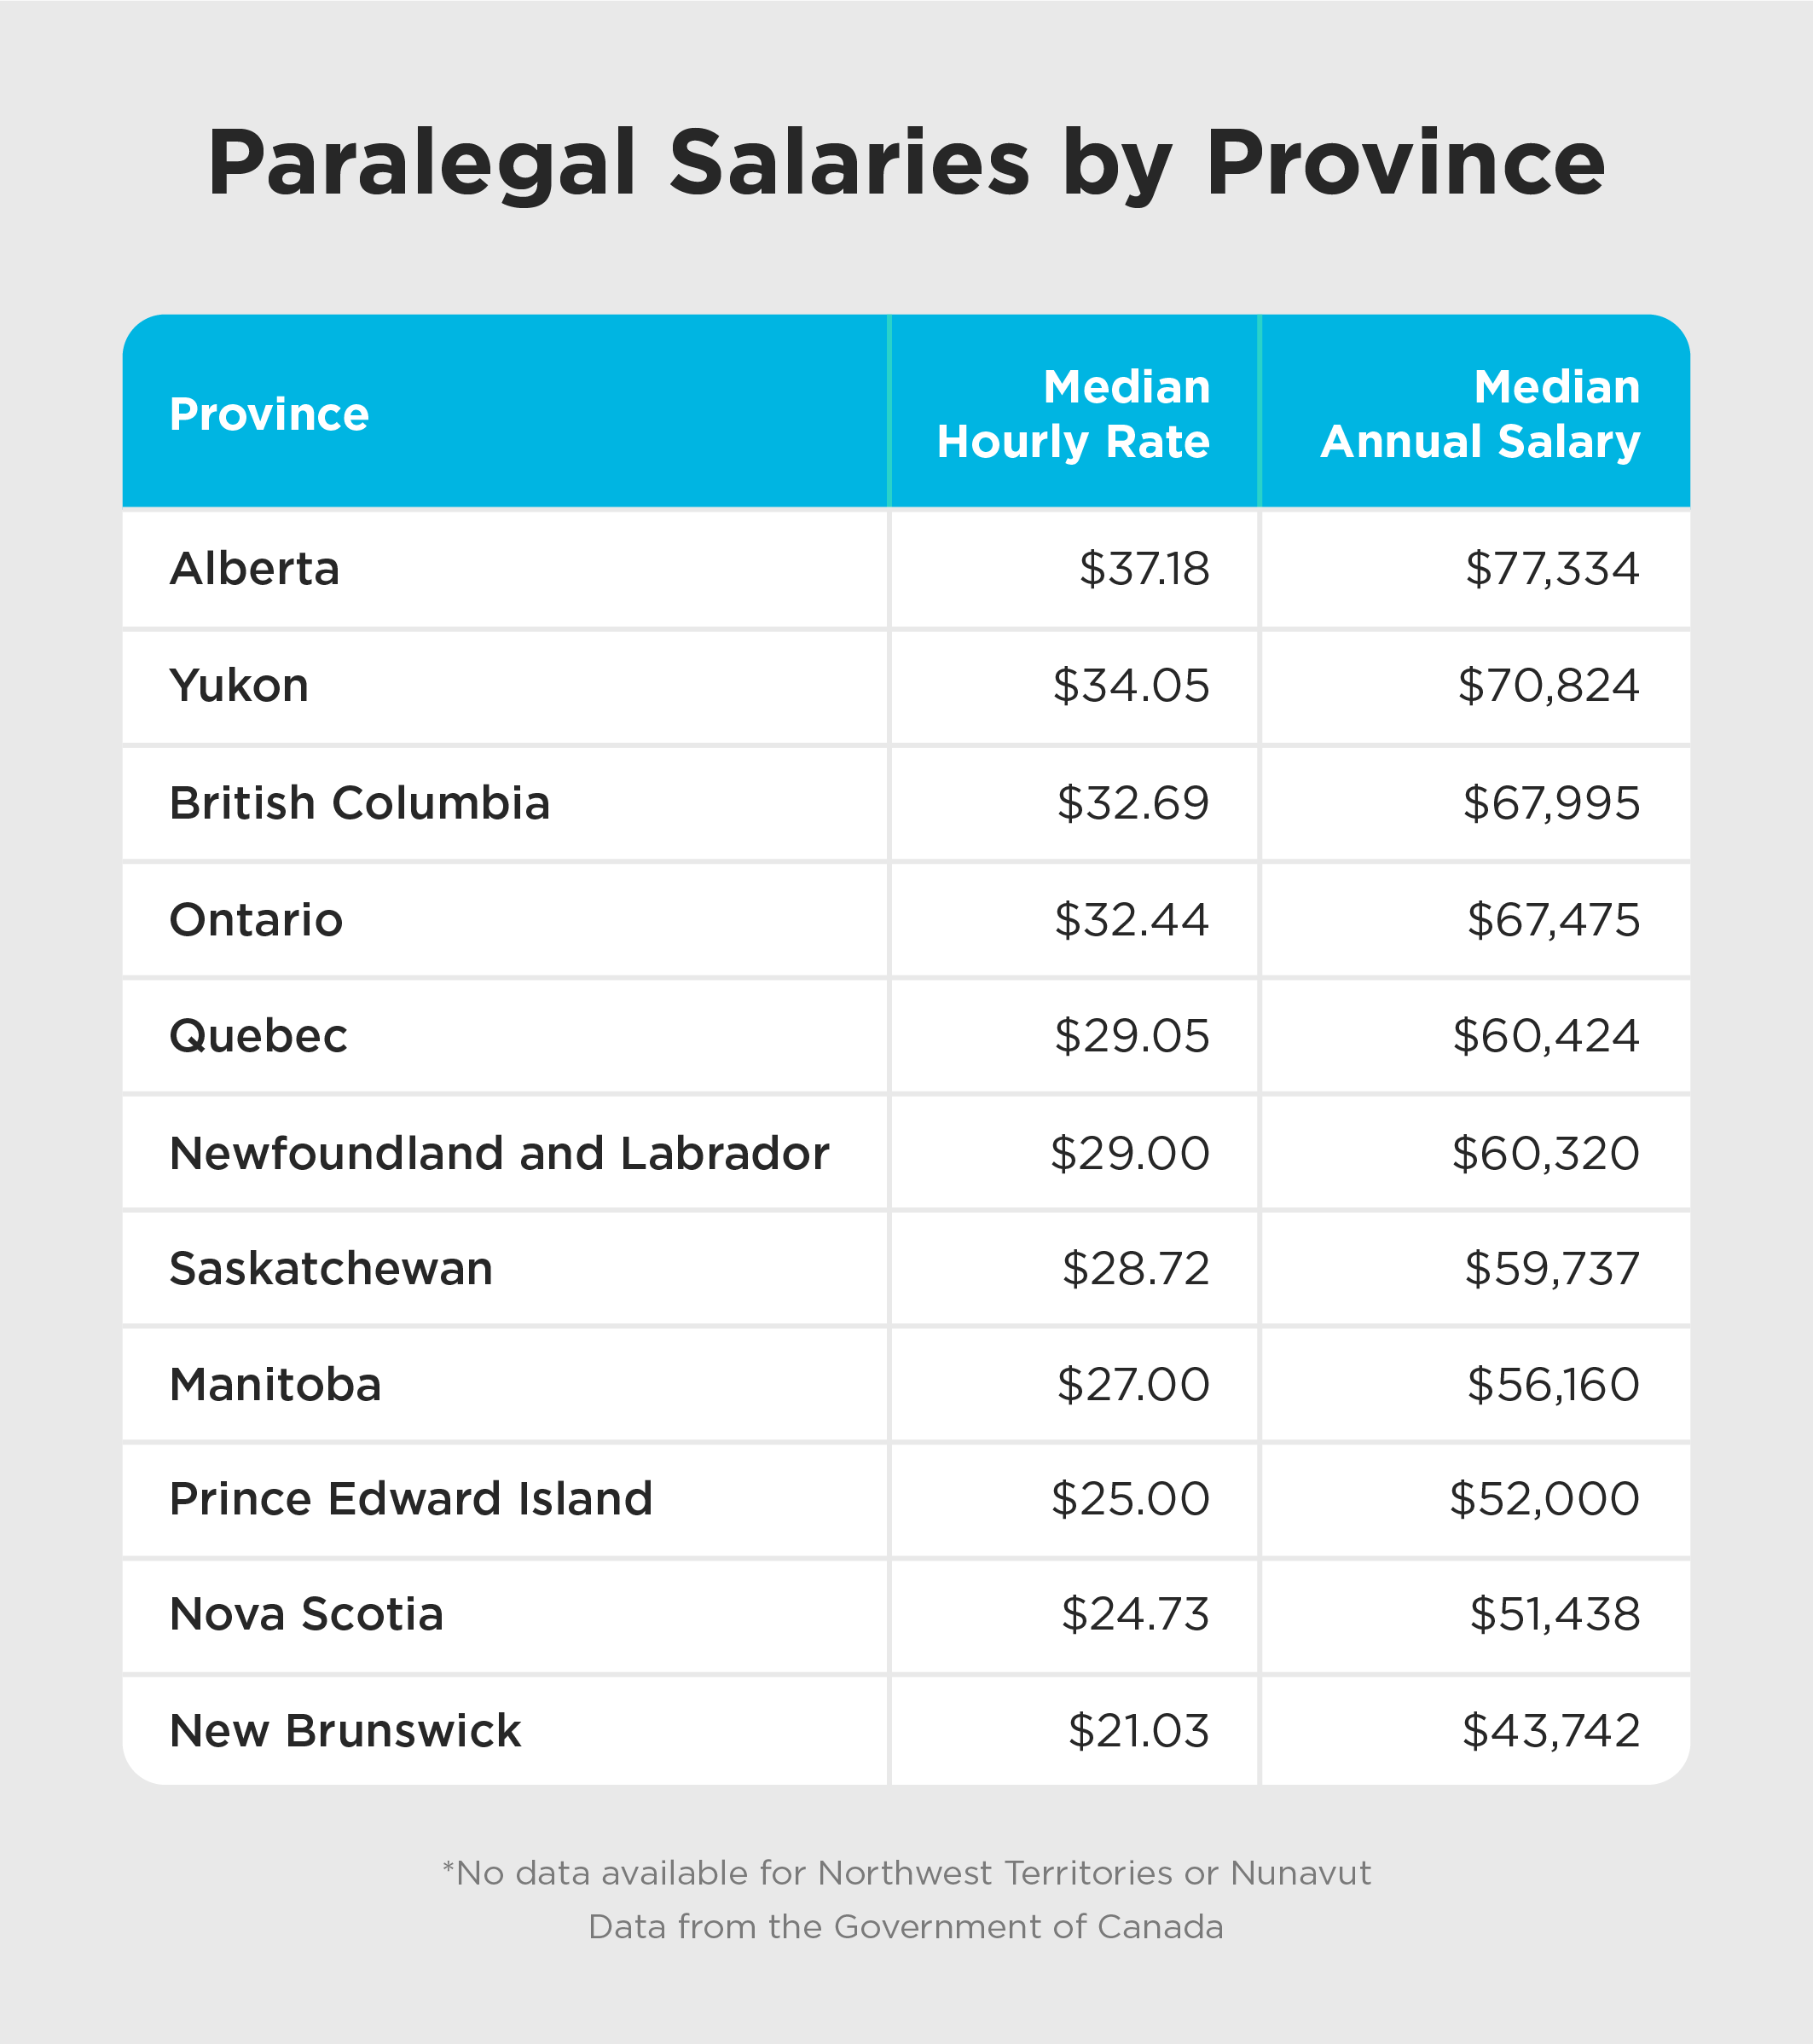 A list of paralegal salaries by province